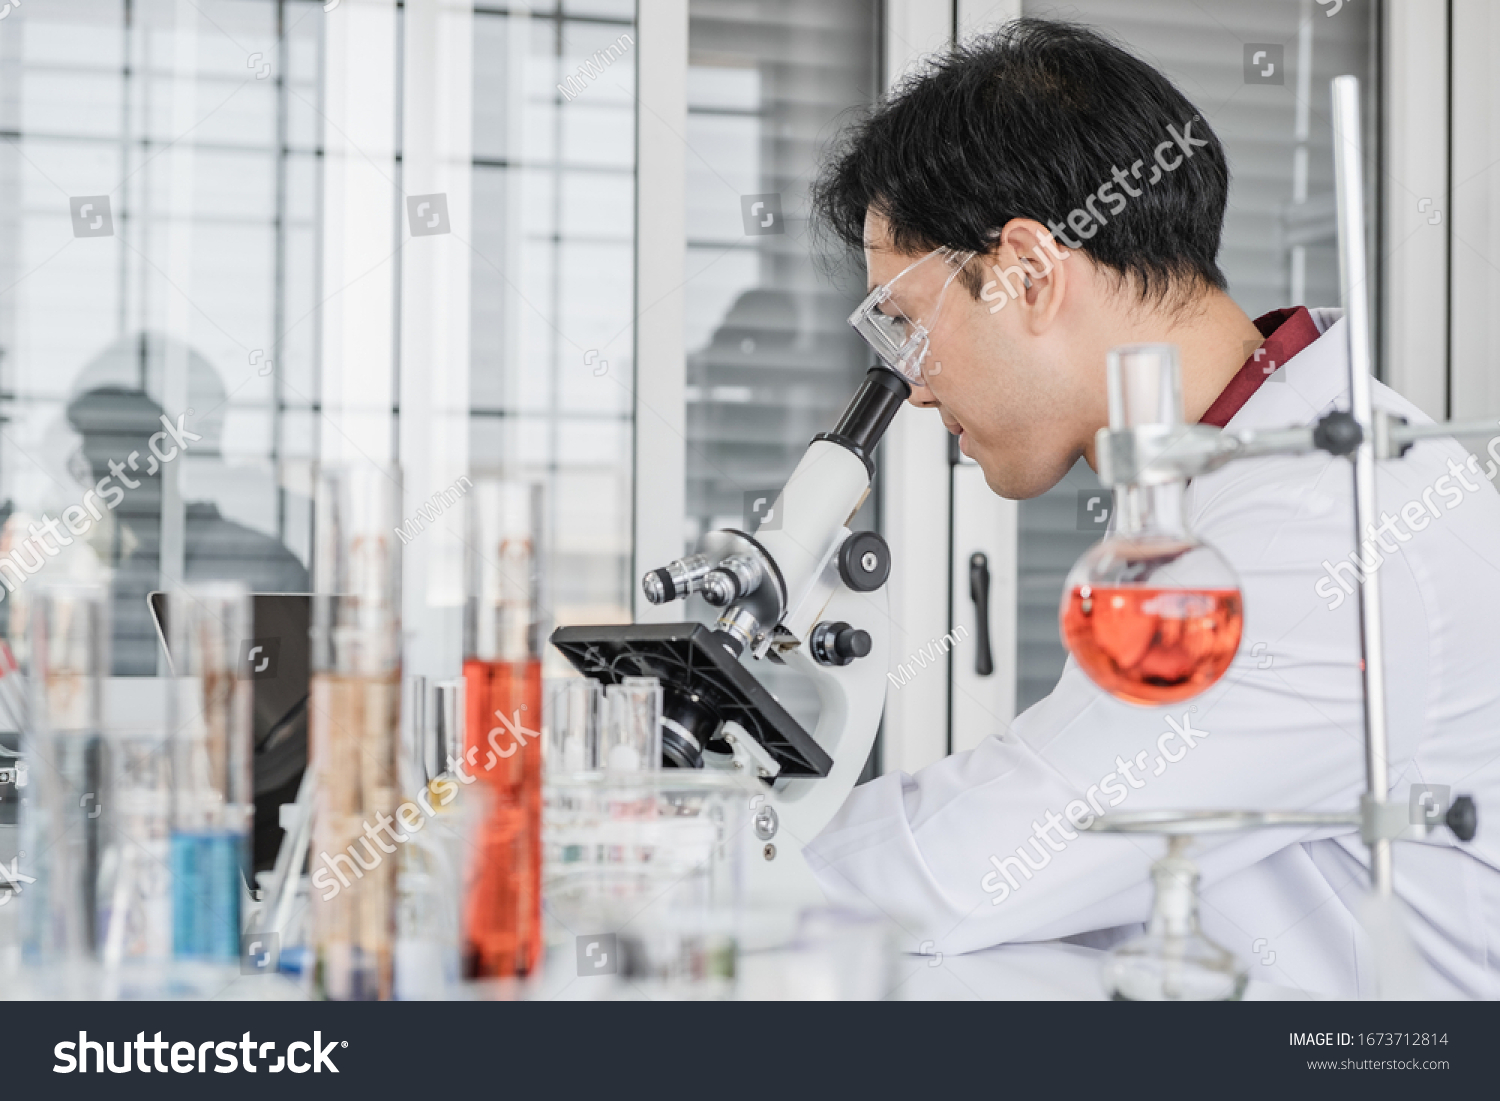 Male Scientist Black Hair Wearing White Stock Photo Edit Now 1673712814